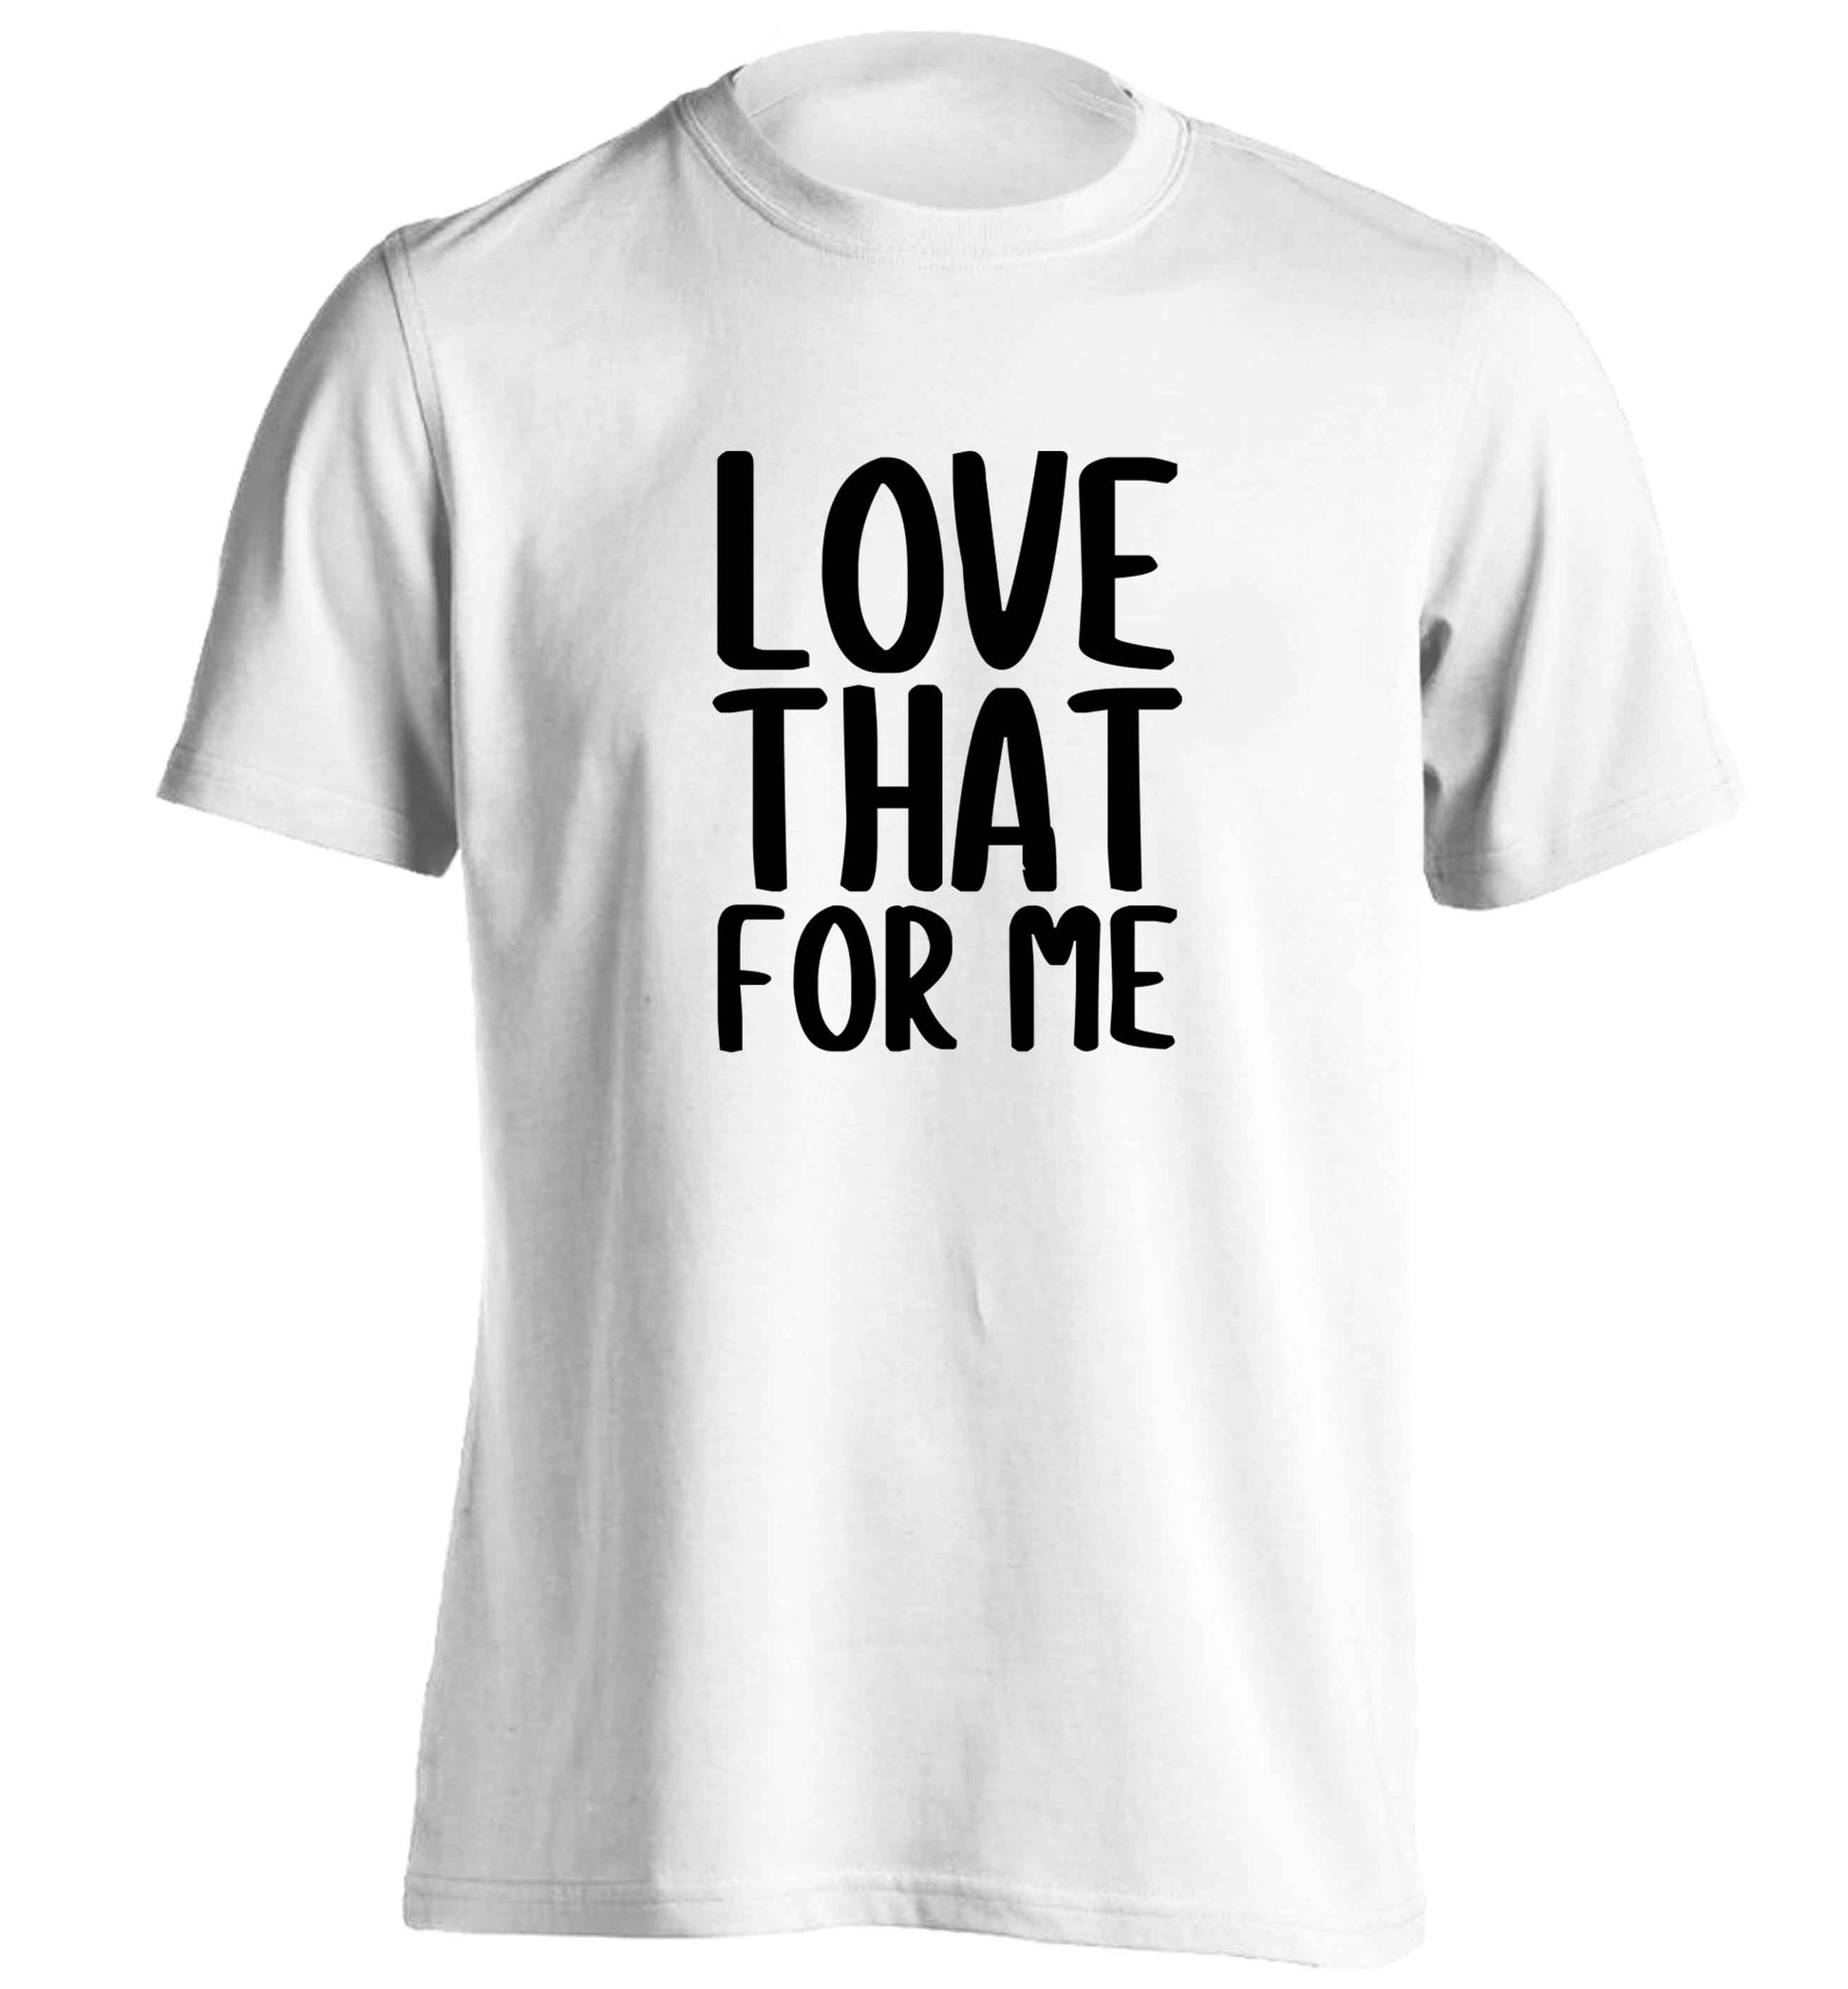 We love this for YOU! Who else loves saying this?!  adults unisex white Tshirt 2XL